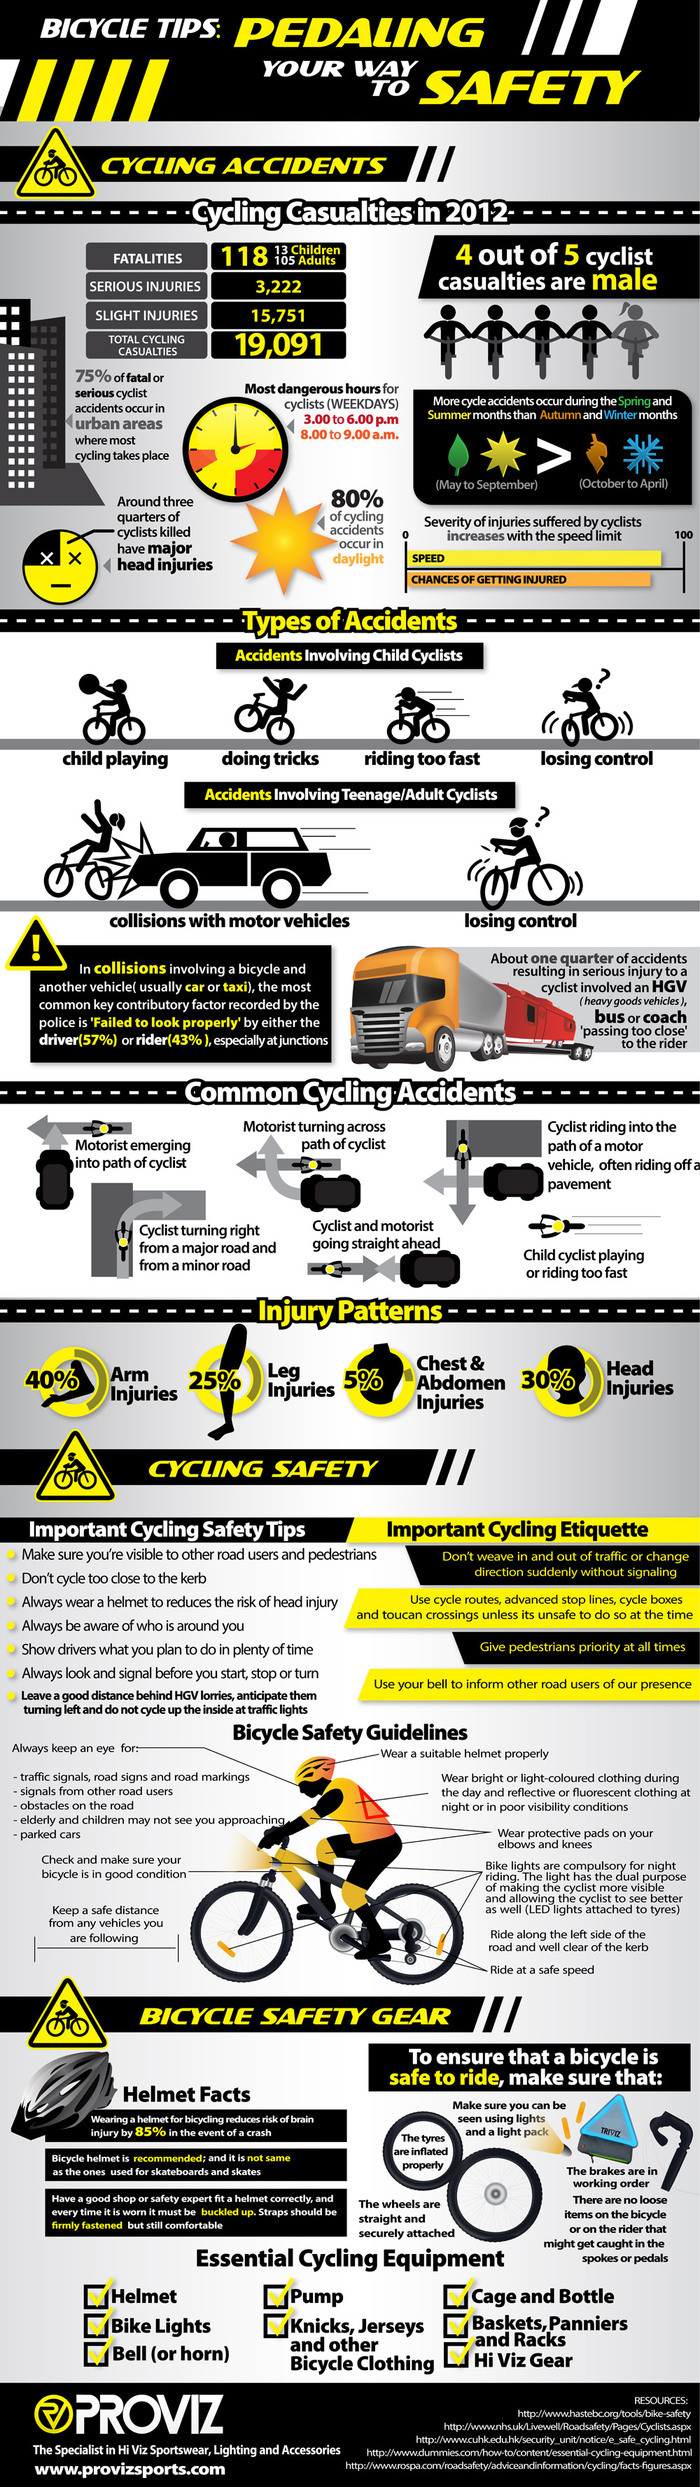 Bicycle Tips: Pedaling Your Way to Safety